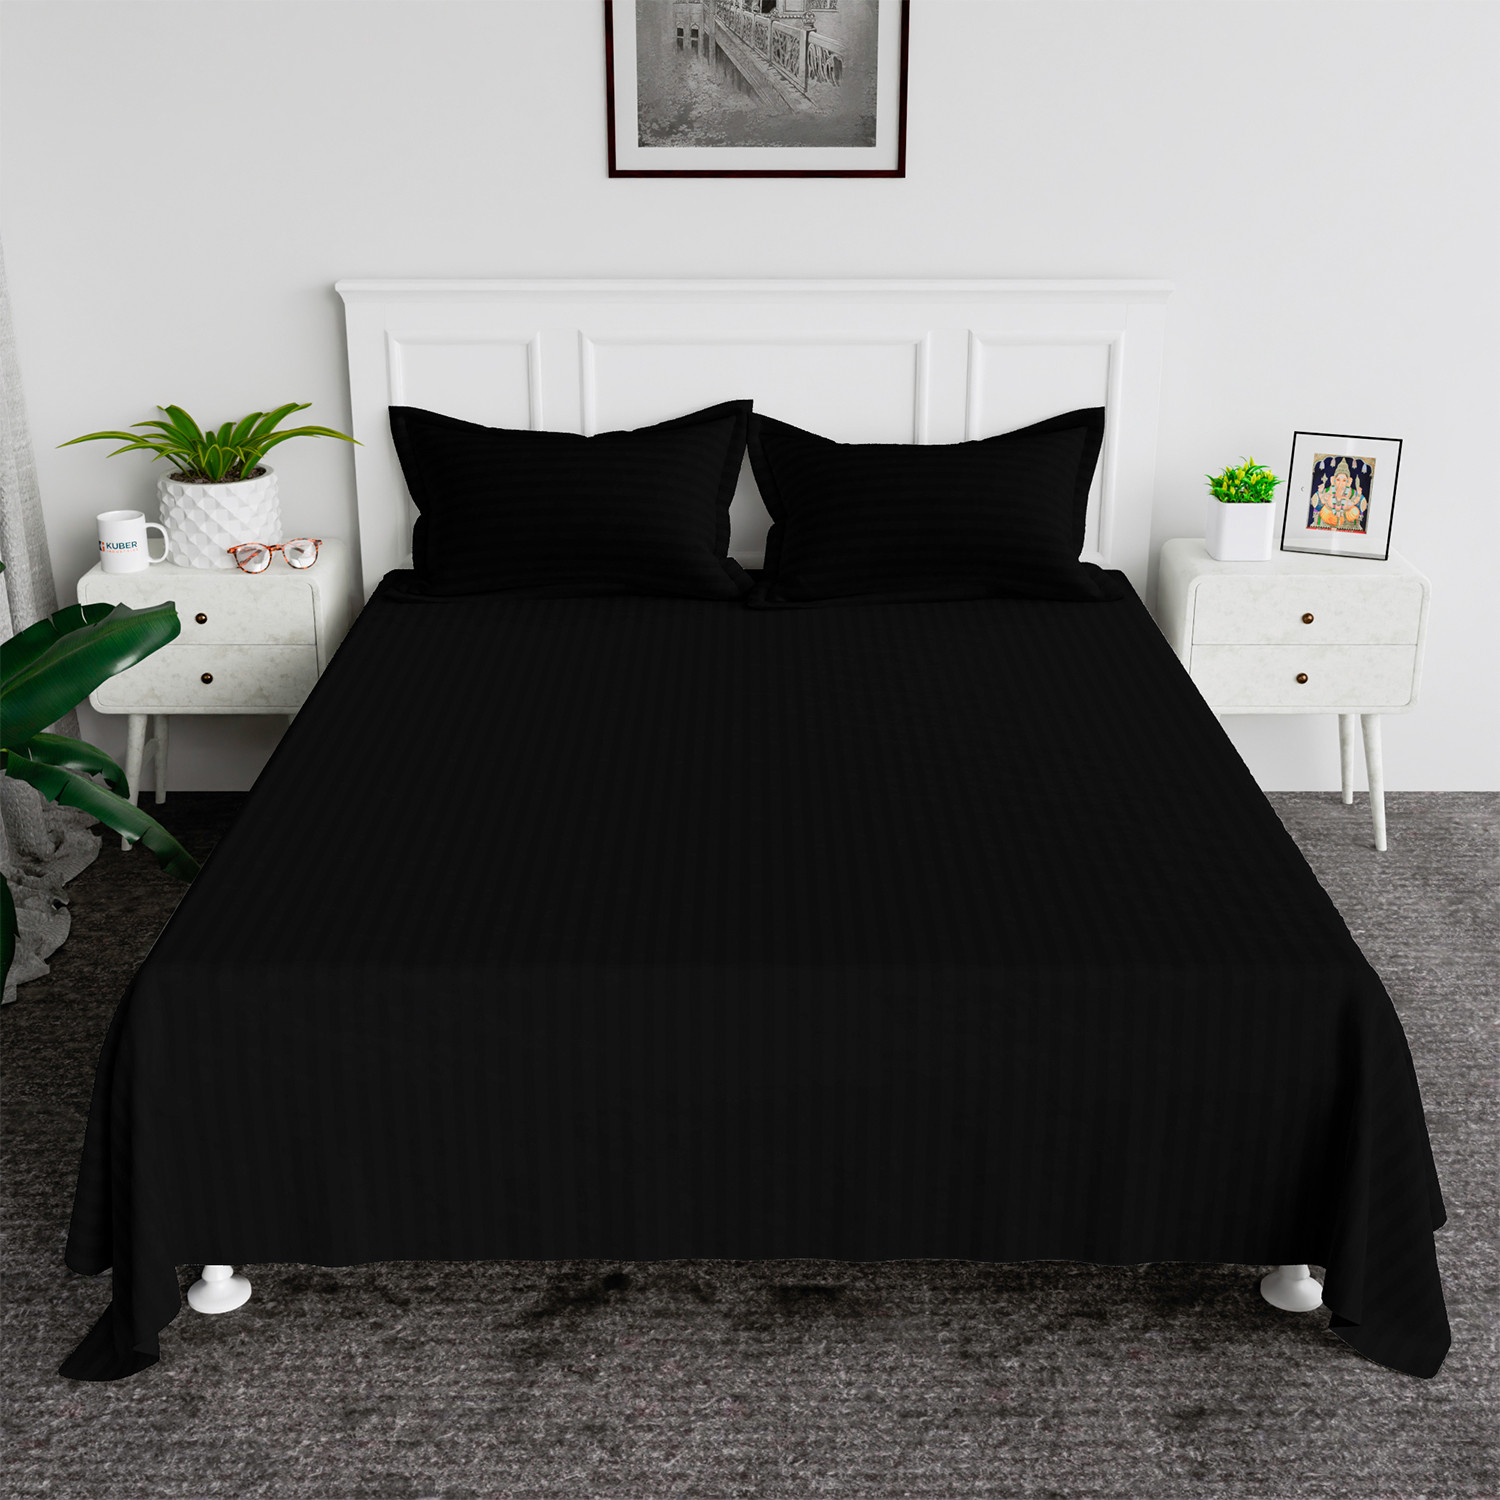 Kuber Industries Double Bedsheet with 2 Pillow Covers | 144 TC Glace Cotton Bedsheet | Satin Striped Bedsheet for Home | Hotel | Bedroom | 90x100 Inch | Black